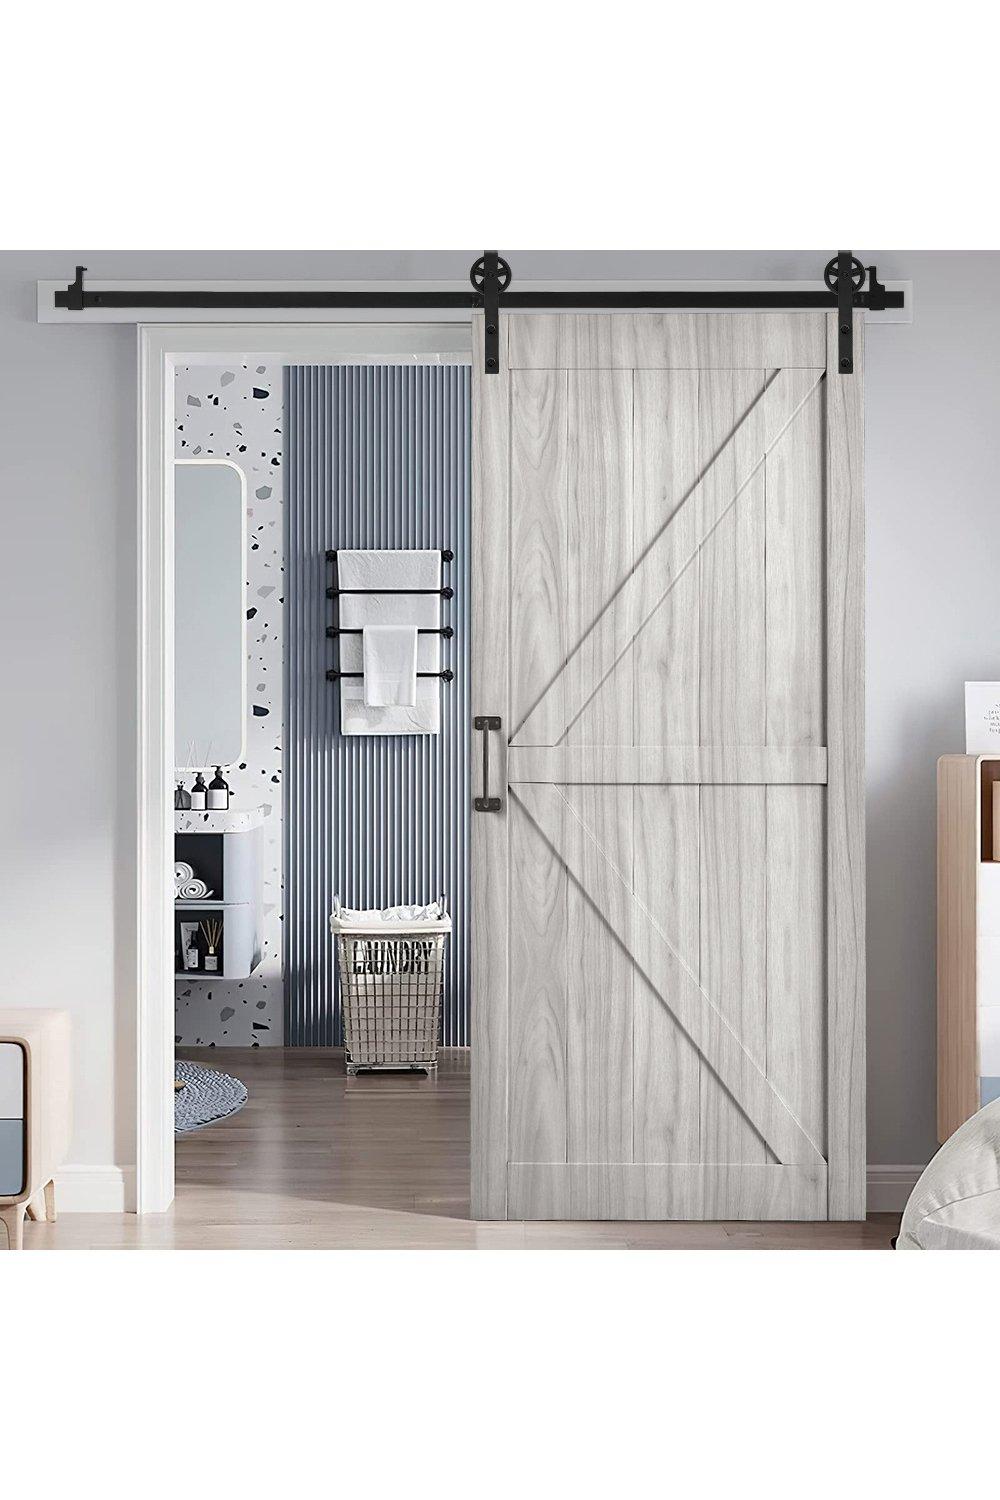 Farmhouse Style Wooden Barn Door with Slide Guide